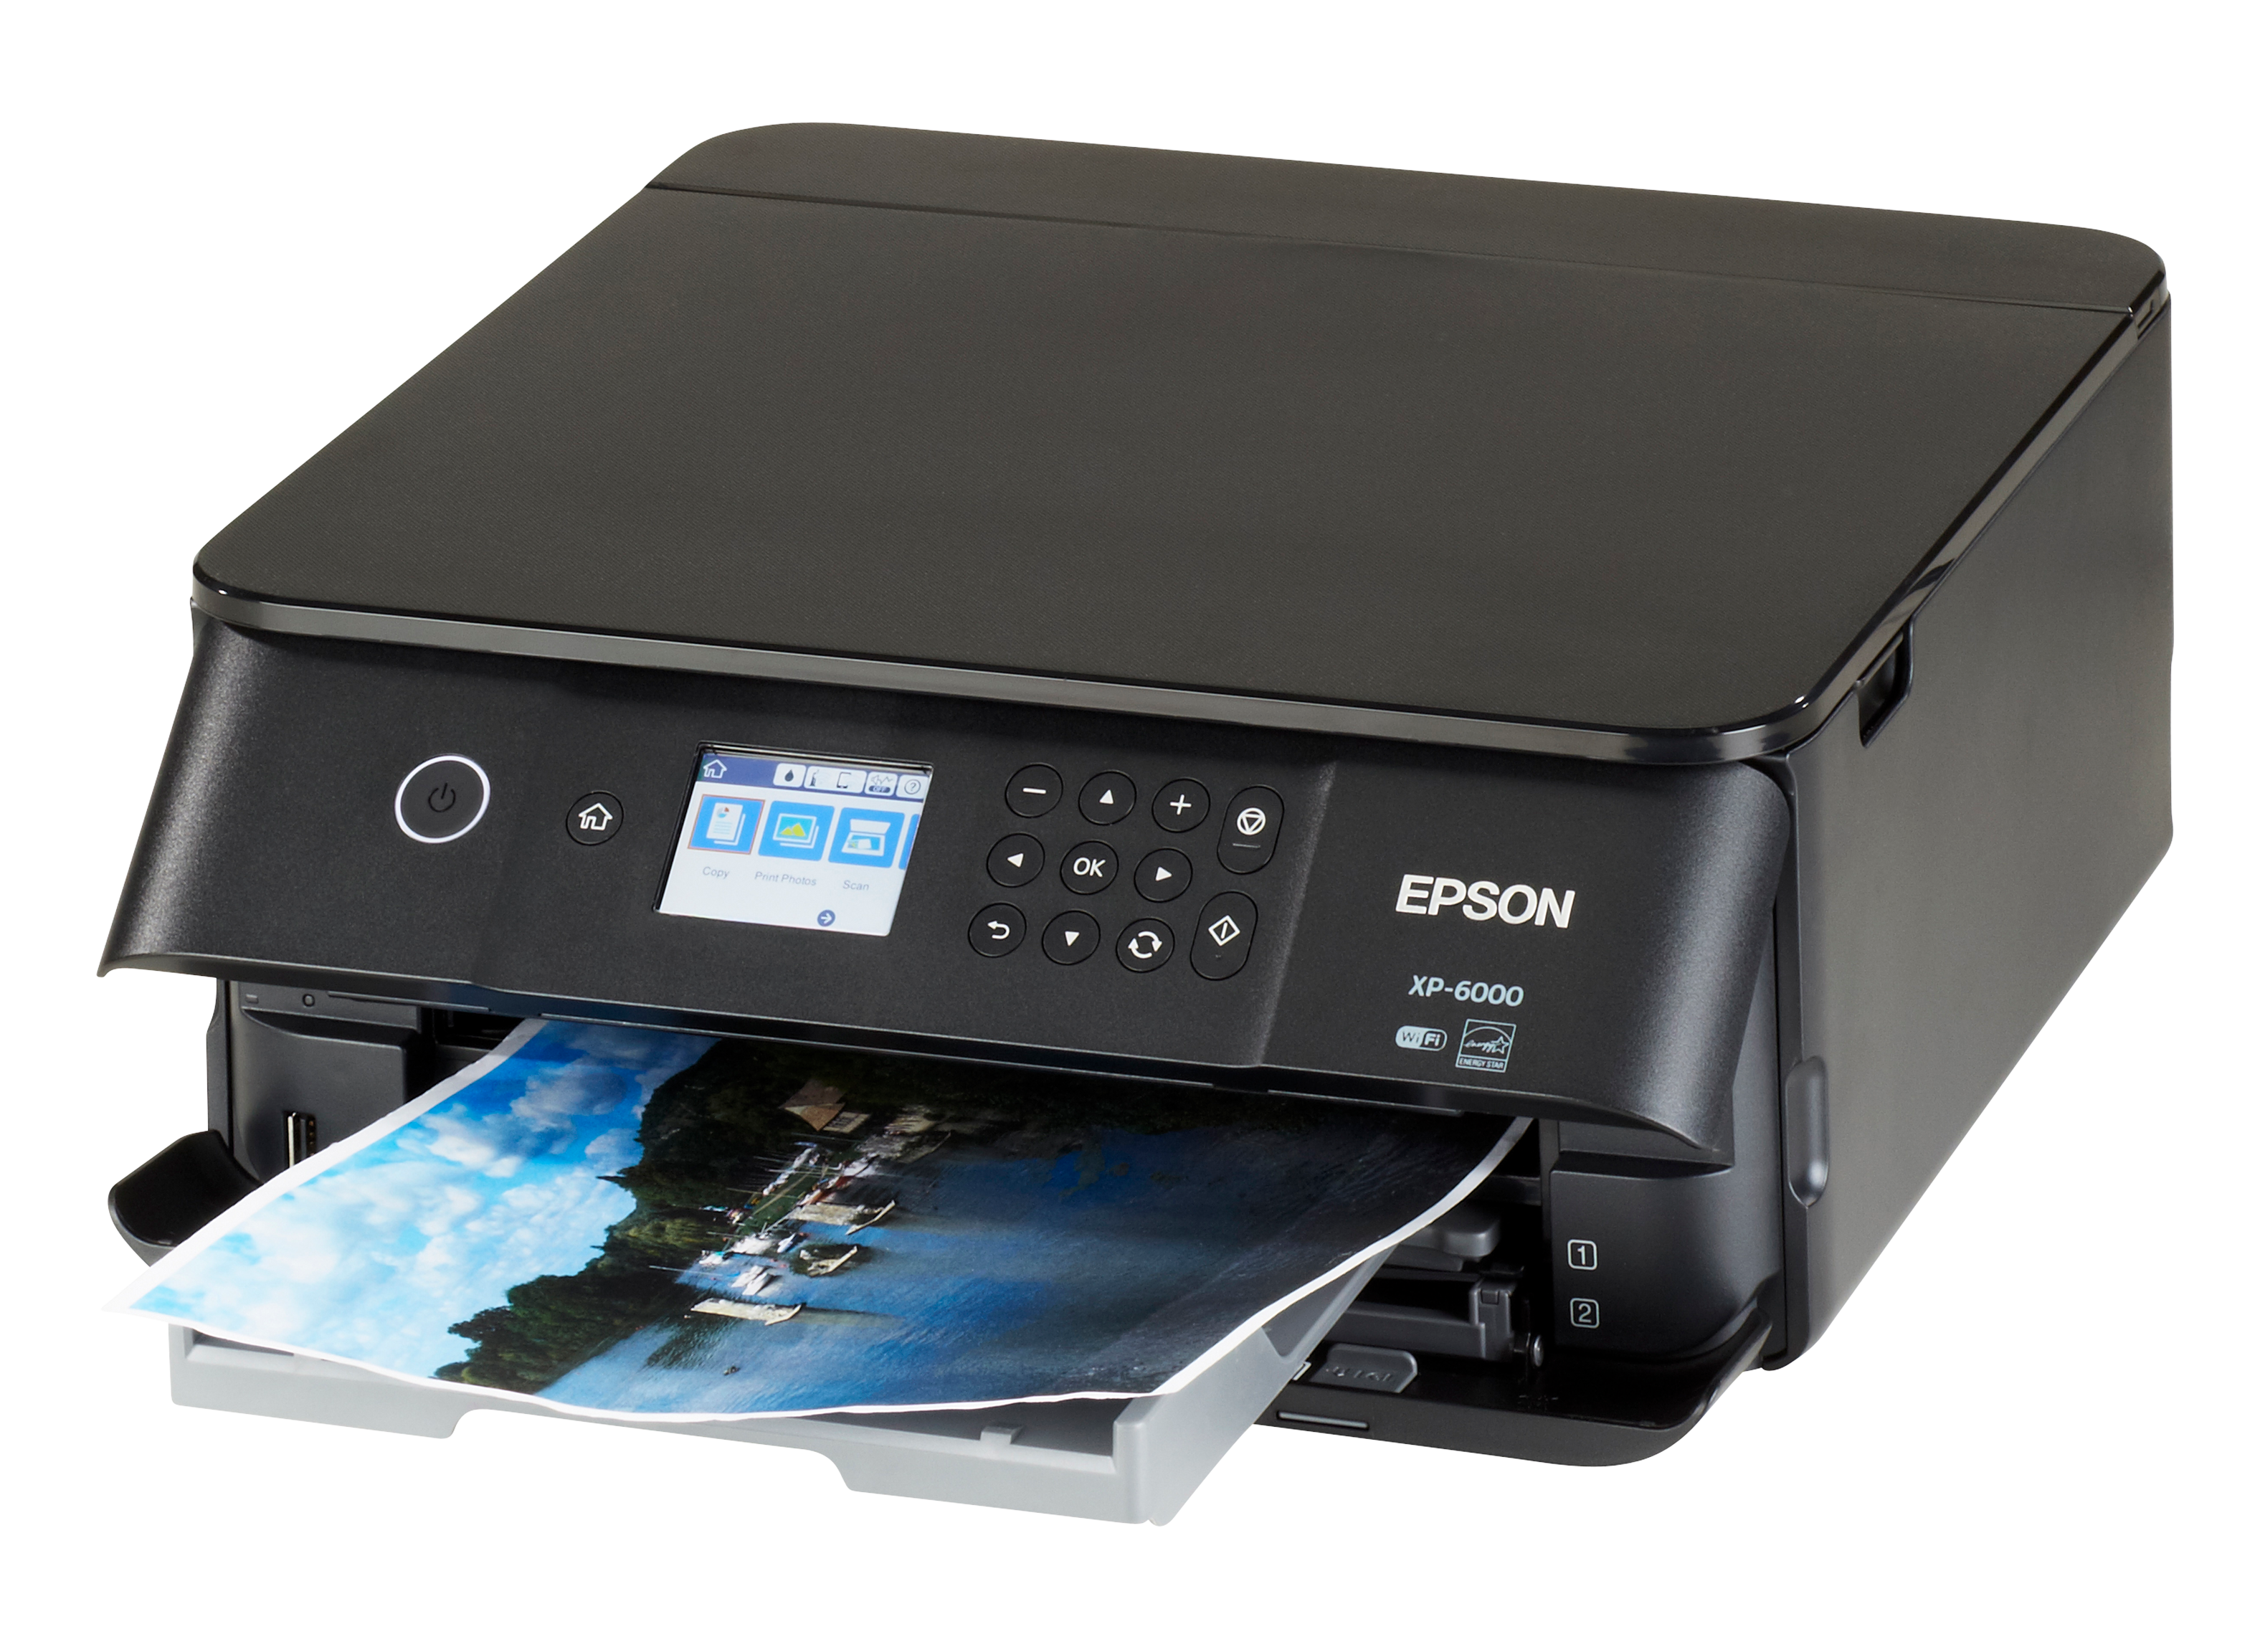 mælk Spectacle dæmning Epson Expression Premium XP-6000 Printer Review - Consumer Reports